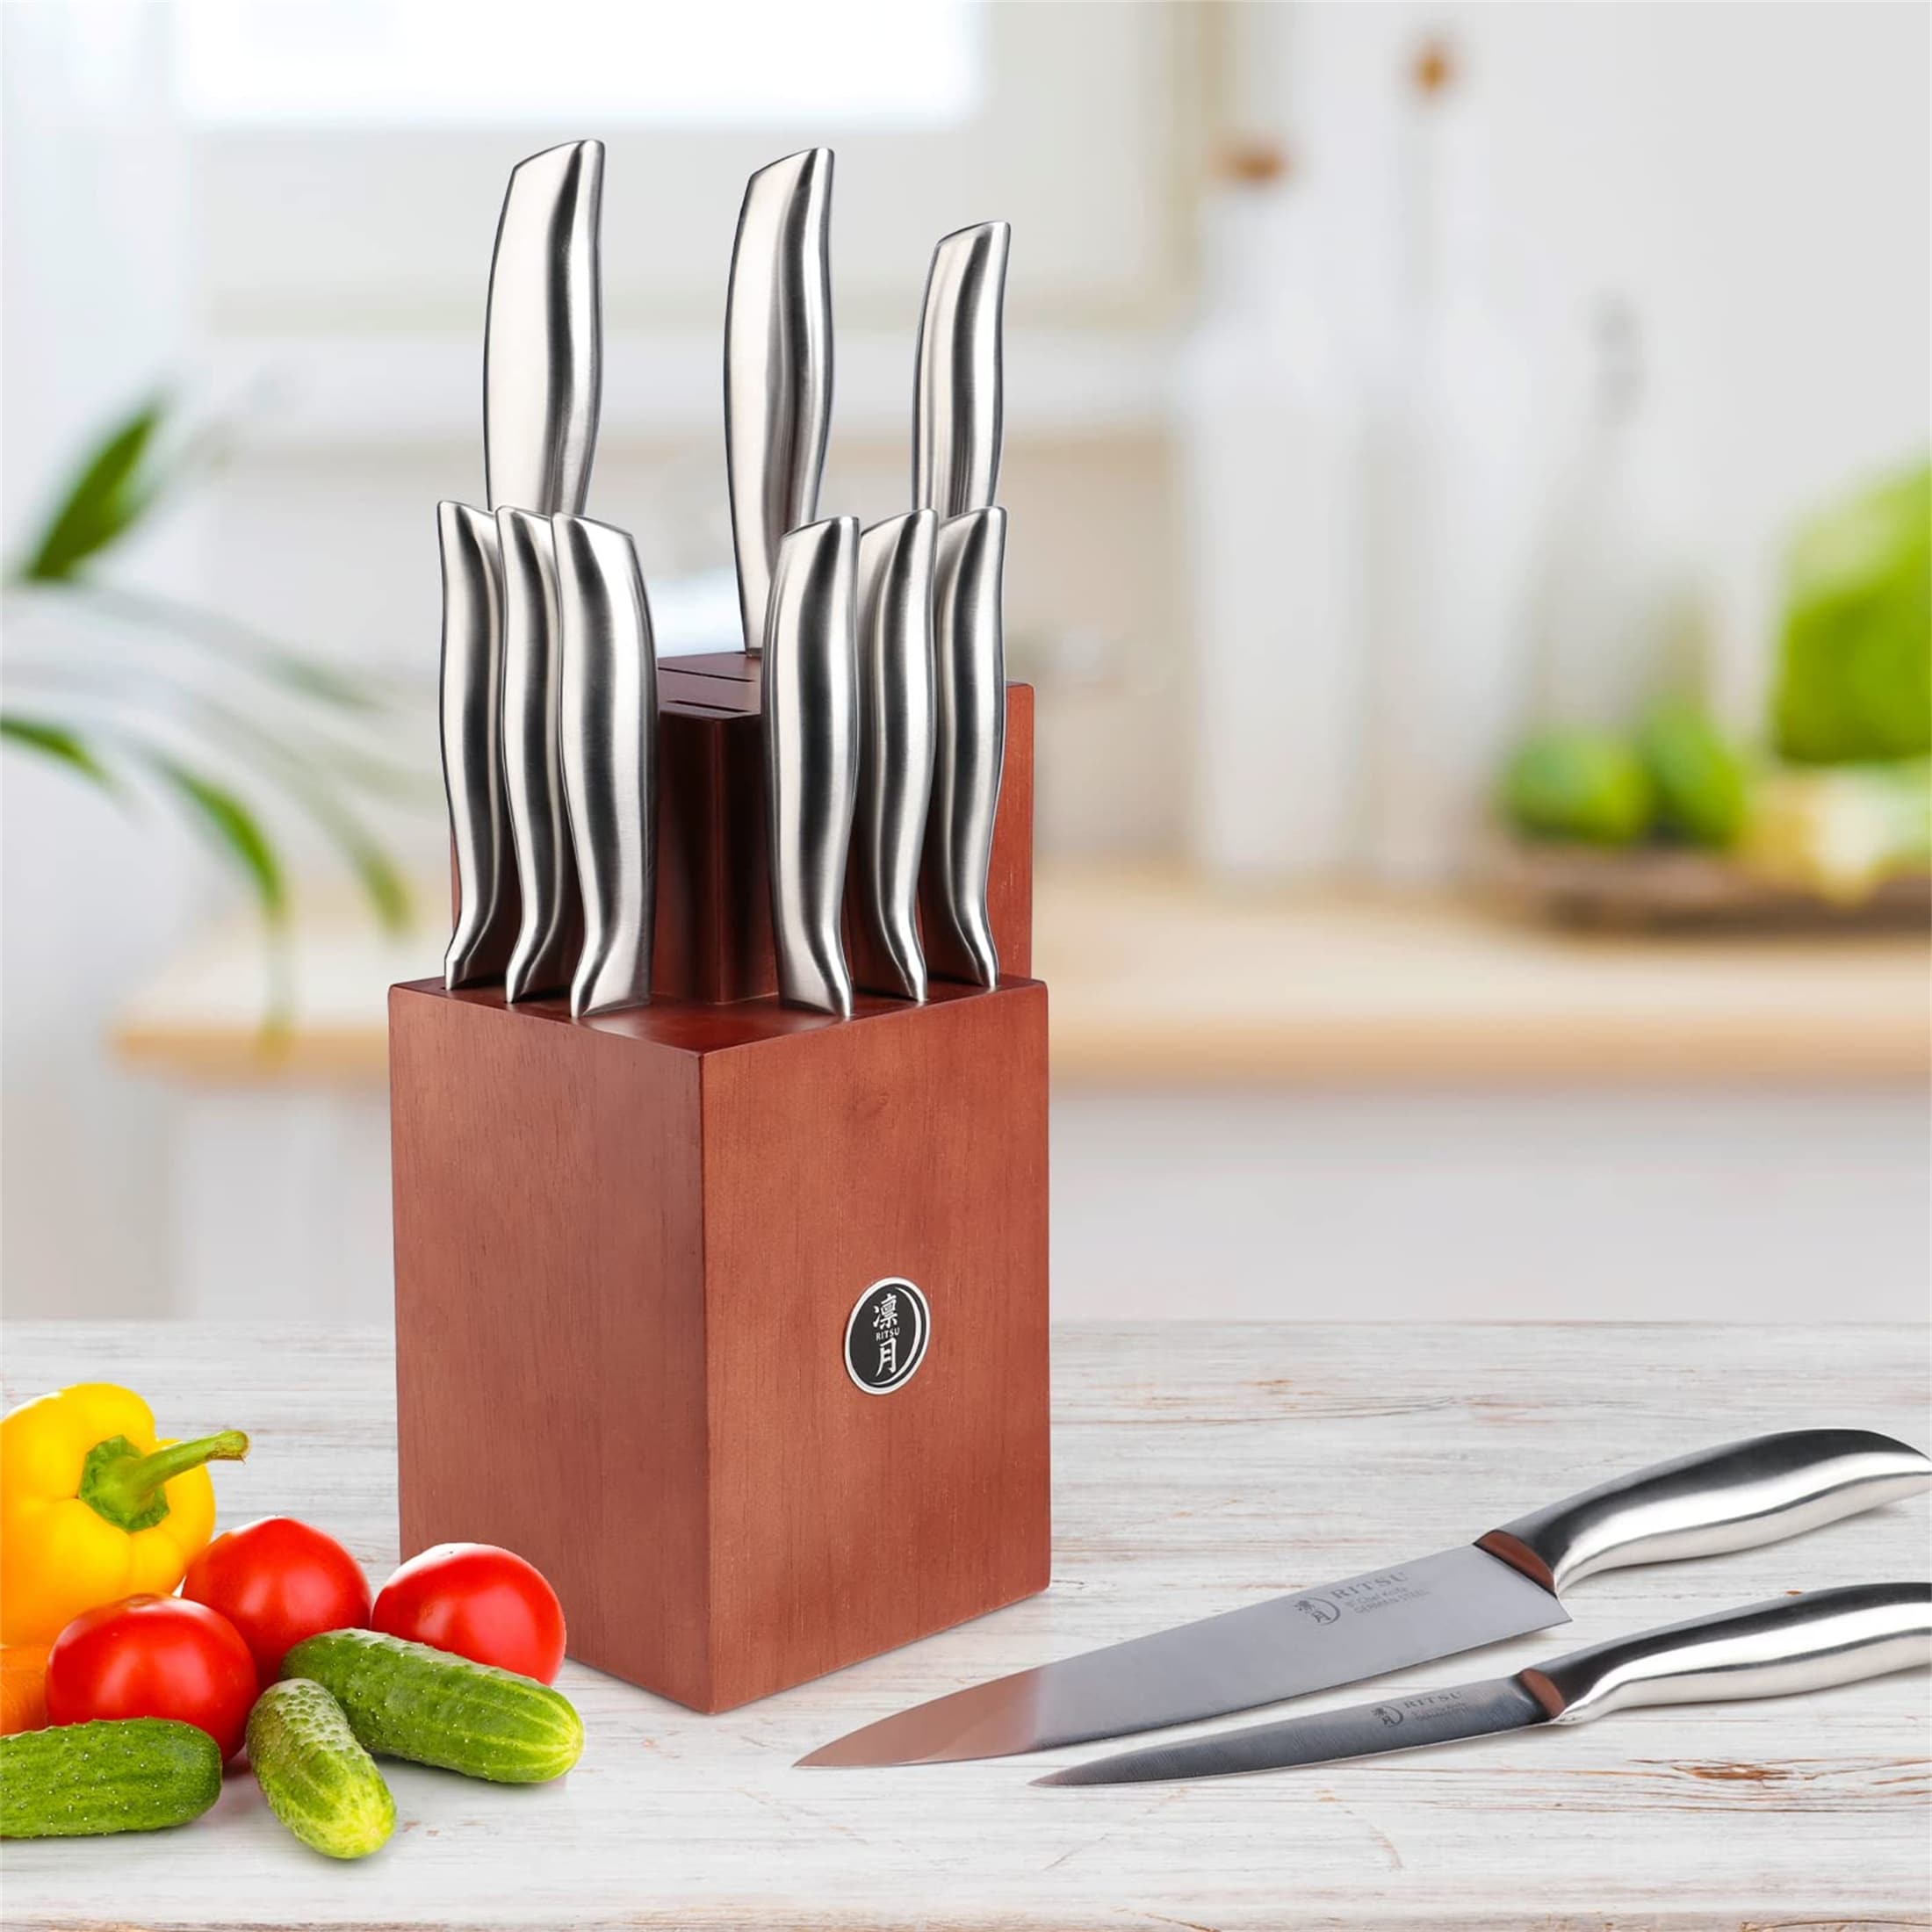 https://ak1.ostkcdn.com/images/products/is/images/direct/ae70c29718d8c22c16fd420cdf0bcfe5e0a895c3/12-Pieces-German-Steel-Knife-Set-With-Block-And-Steak-Knives.jpg